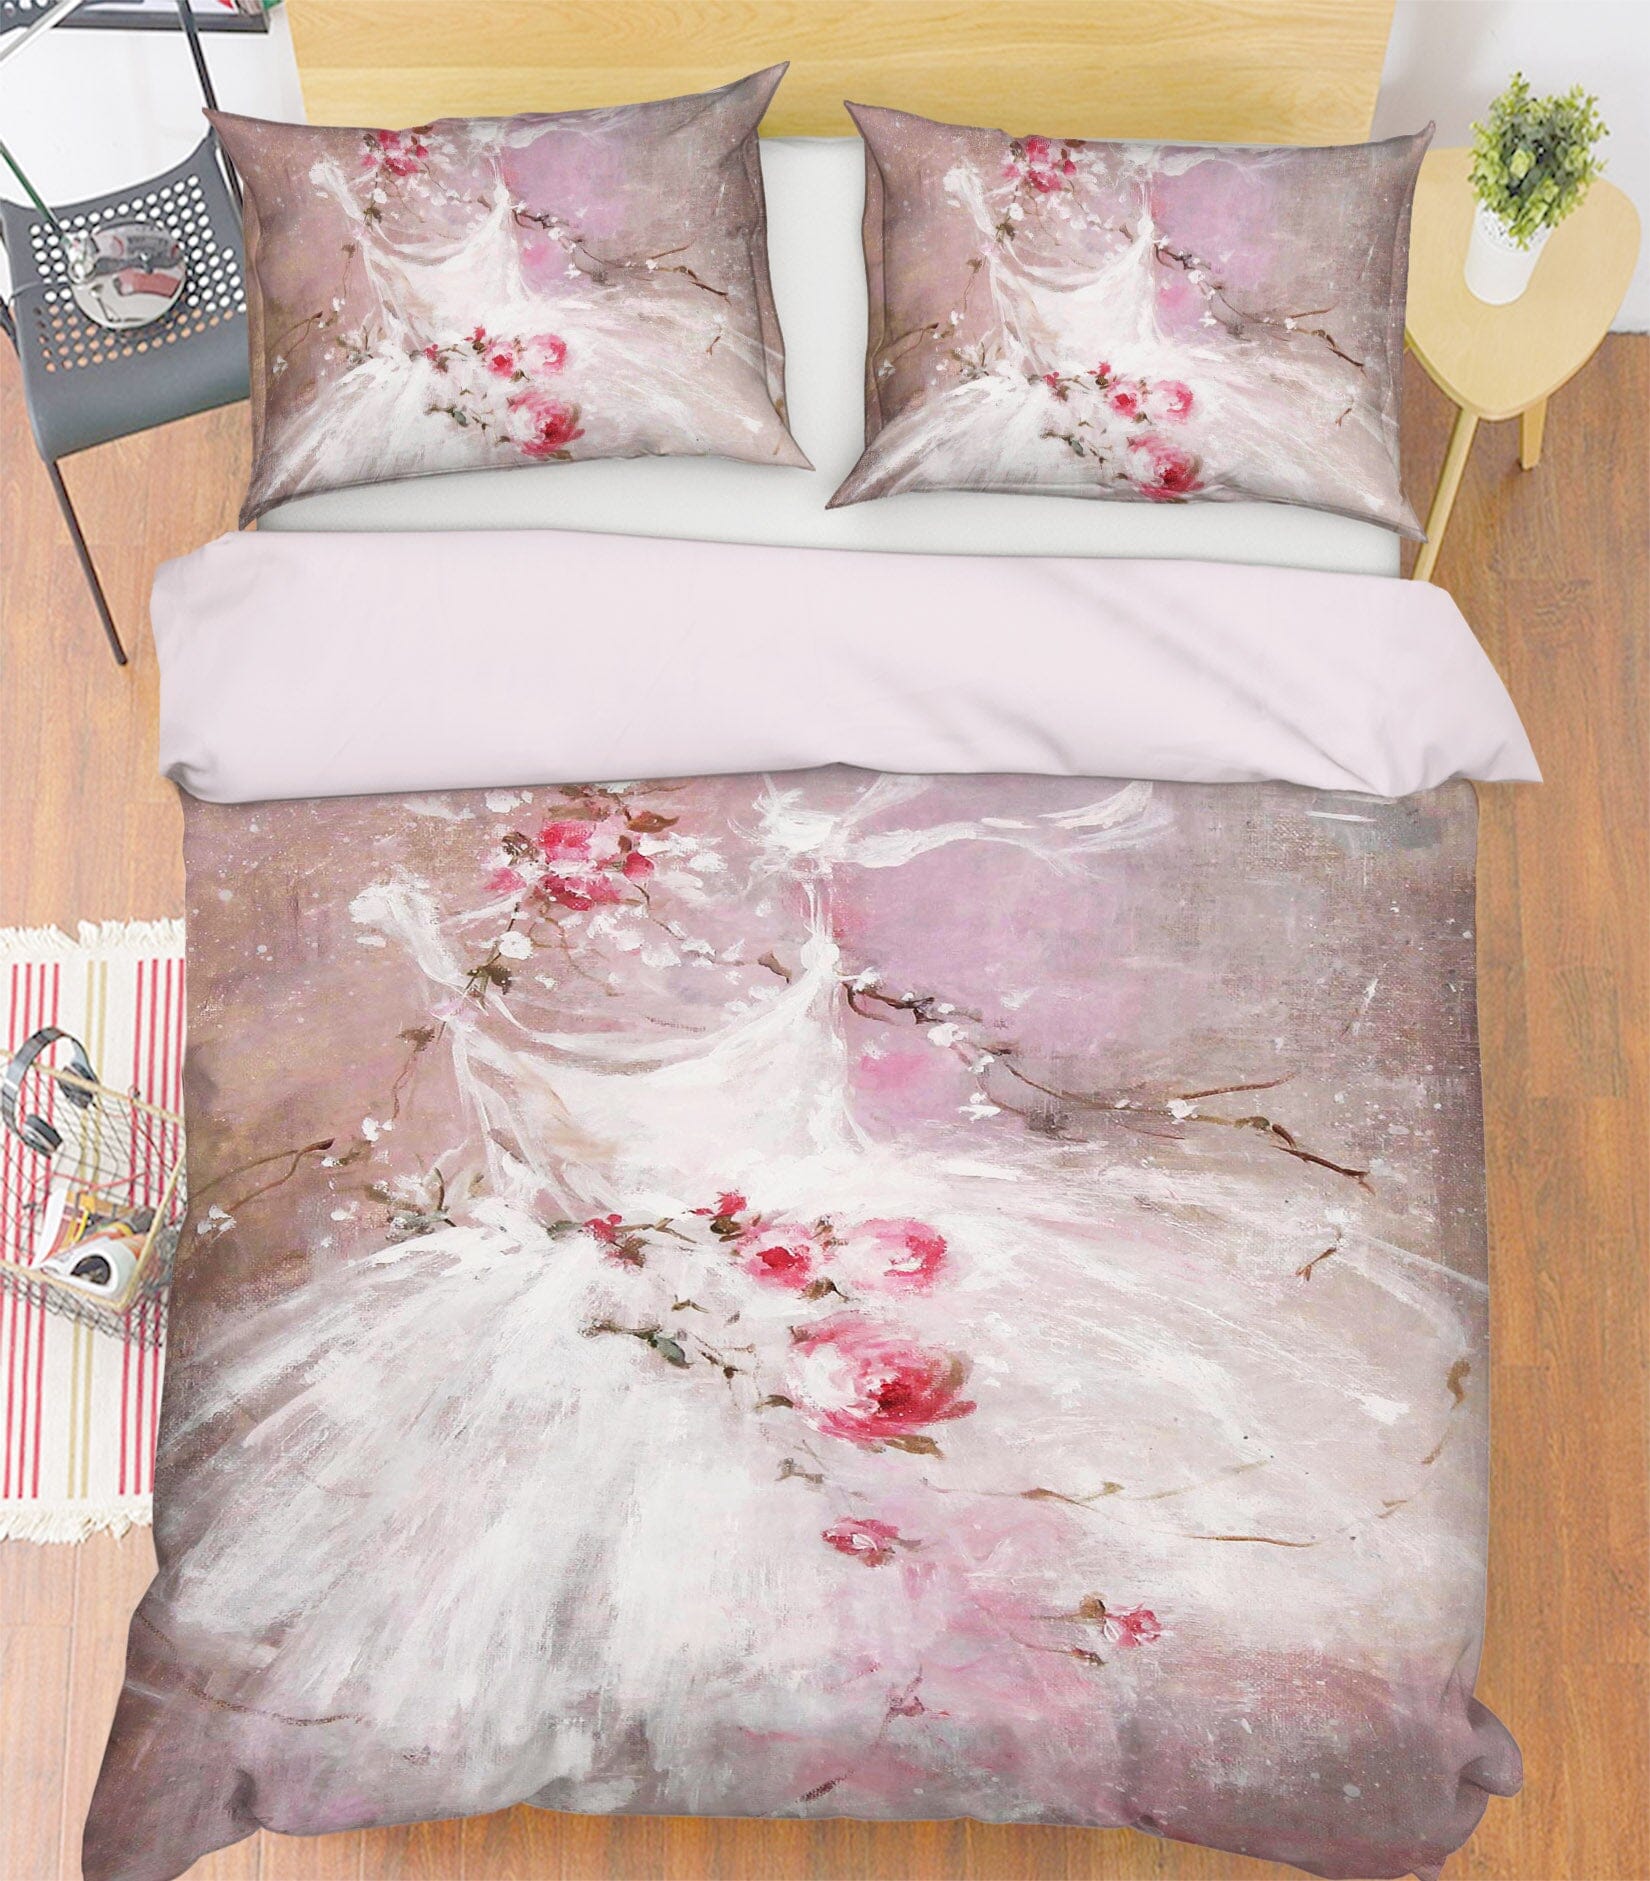 3D White Skirt Wedding 018 Debi Coules Bedding Bed Pillowcases Quilt Quiet Covers AJ Creativity Home 